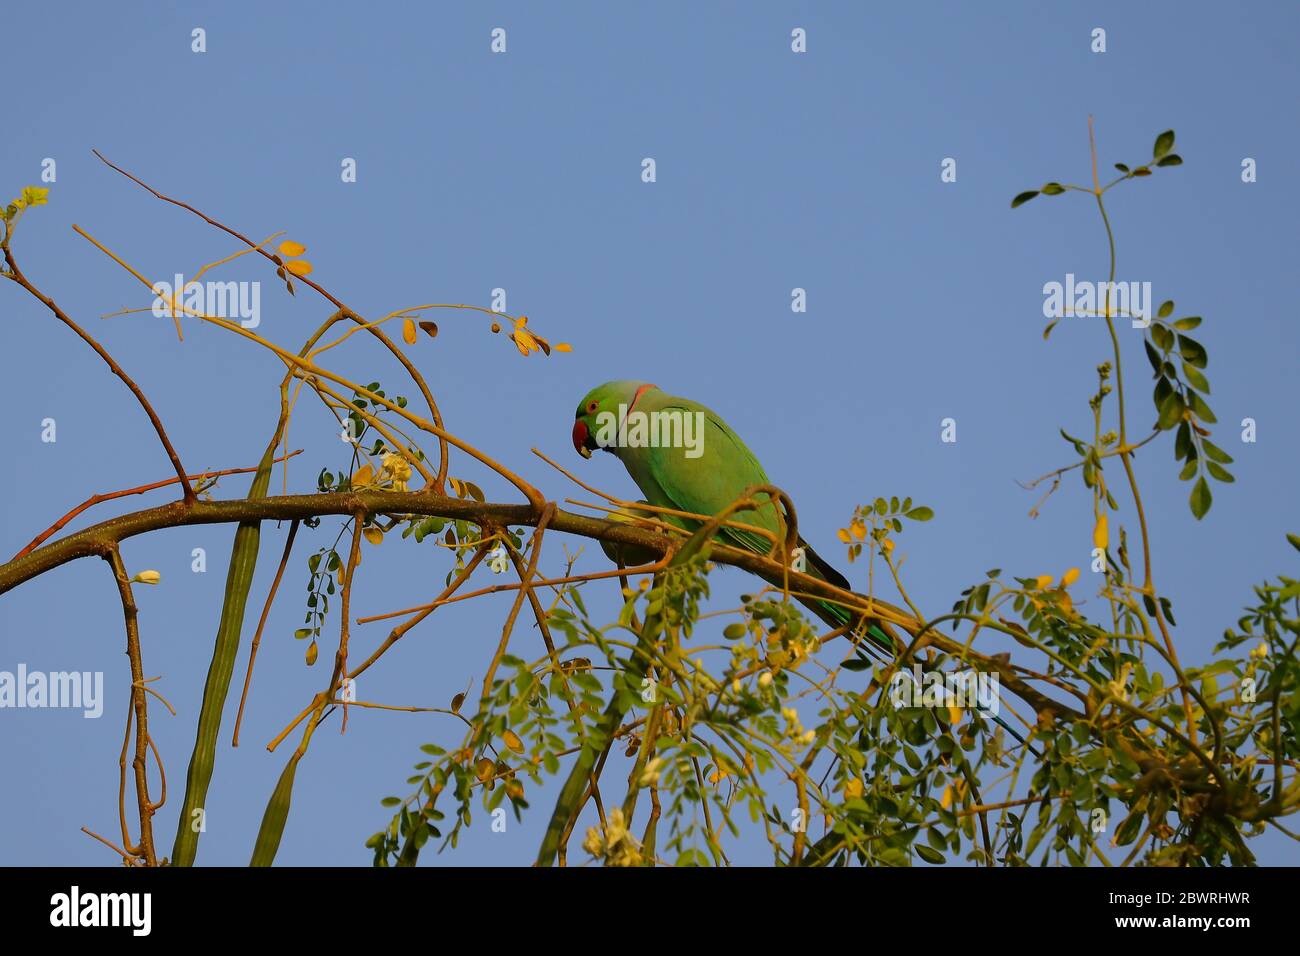 a young green parrot eating jujube fruit on the tree branch Stock Photo